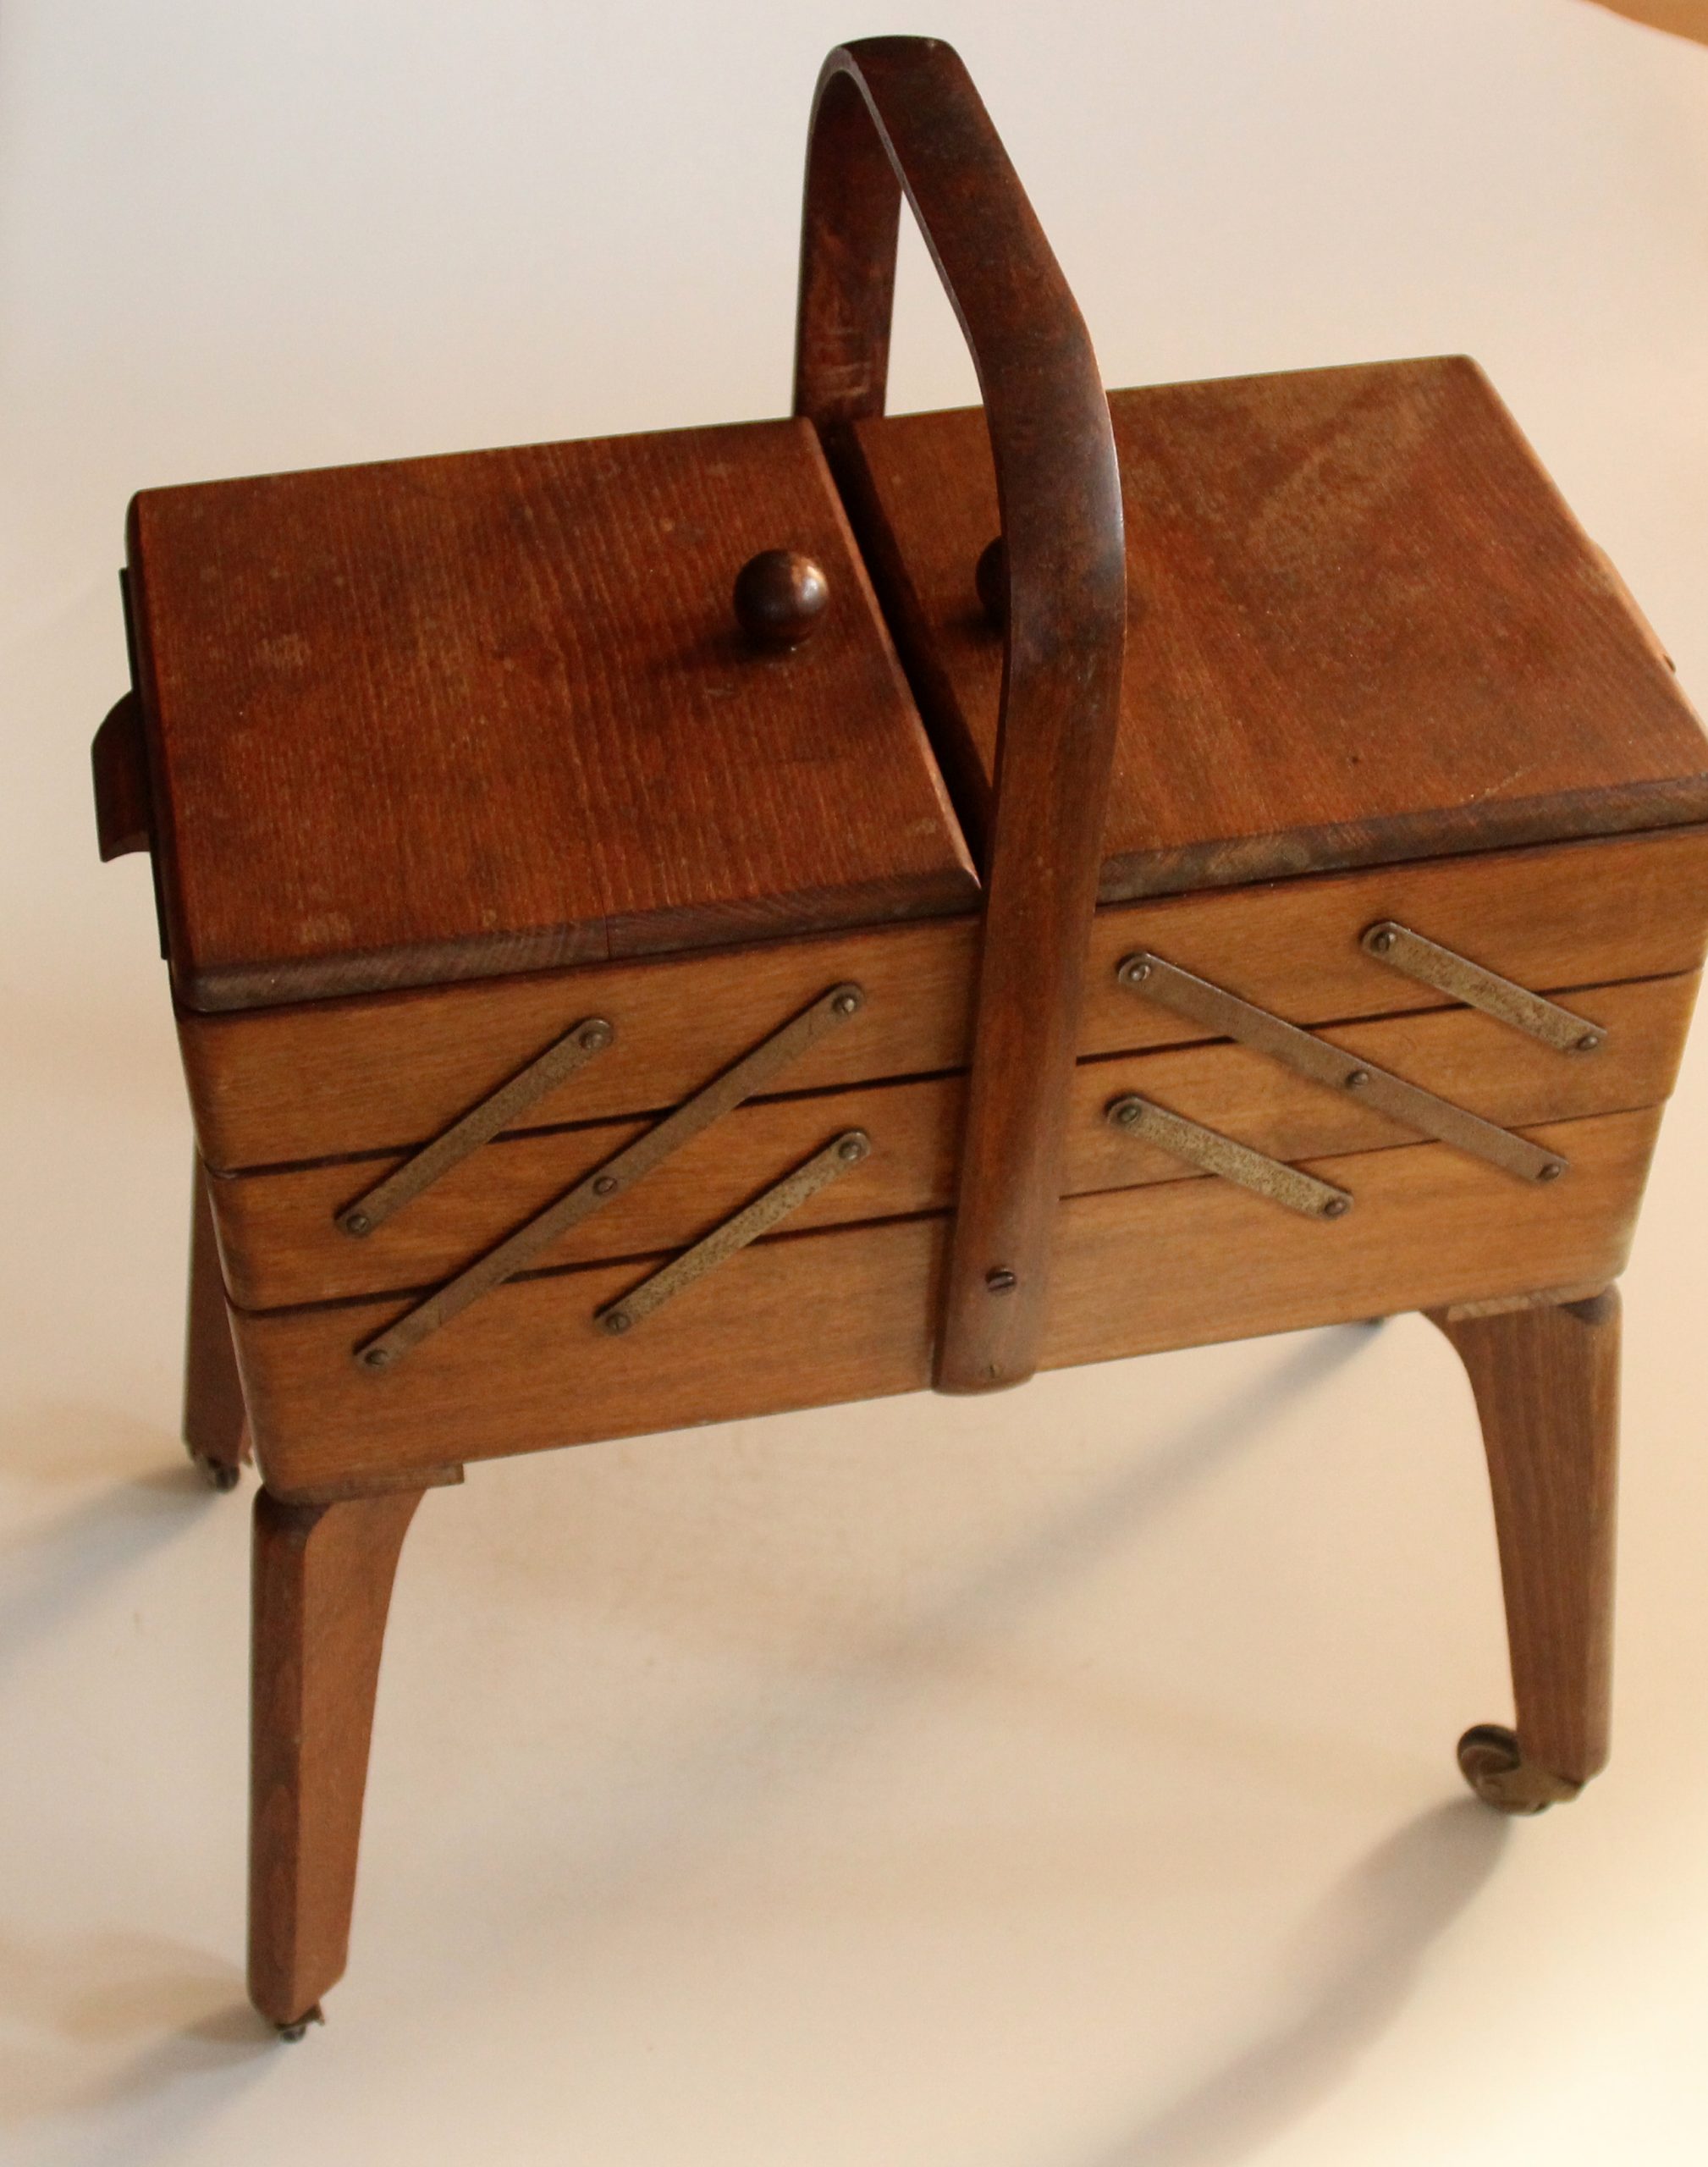 Old wood and metal sewing basket, foldable, with wheels, vintage from the  1950s - Hunt Vintage